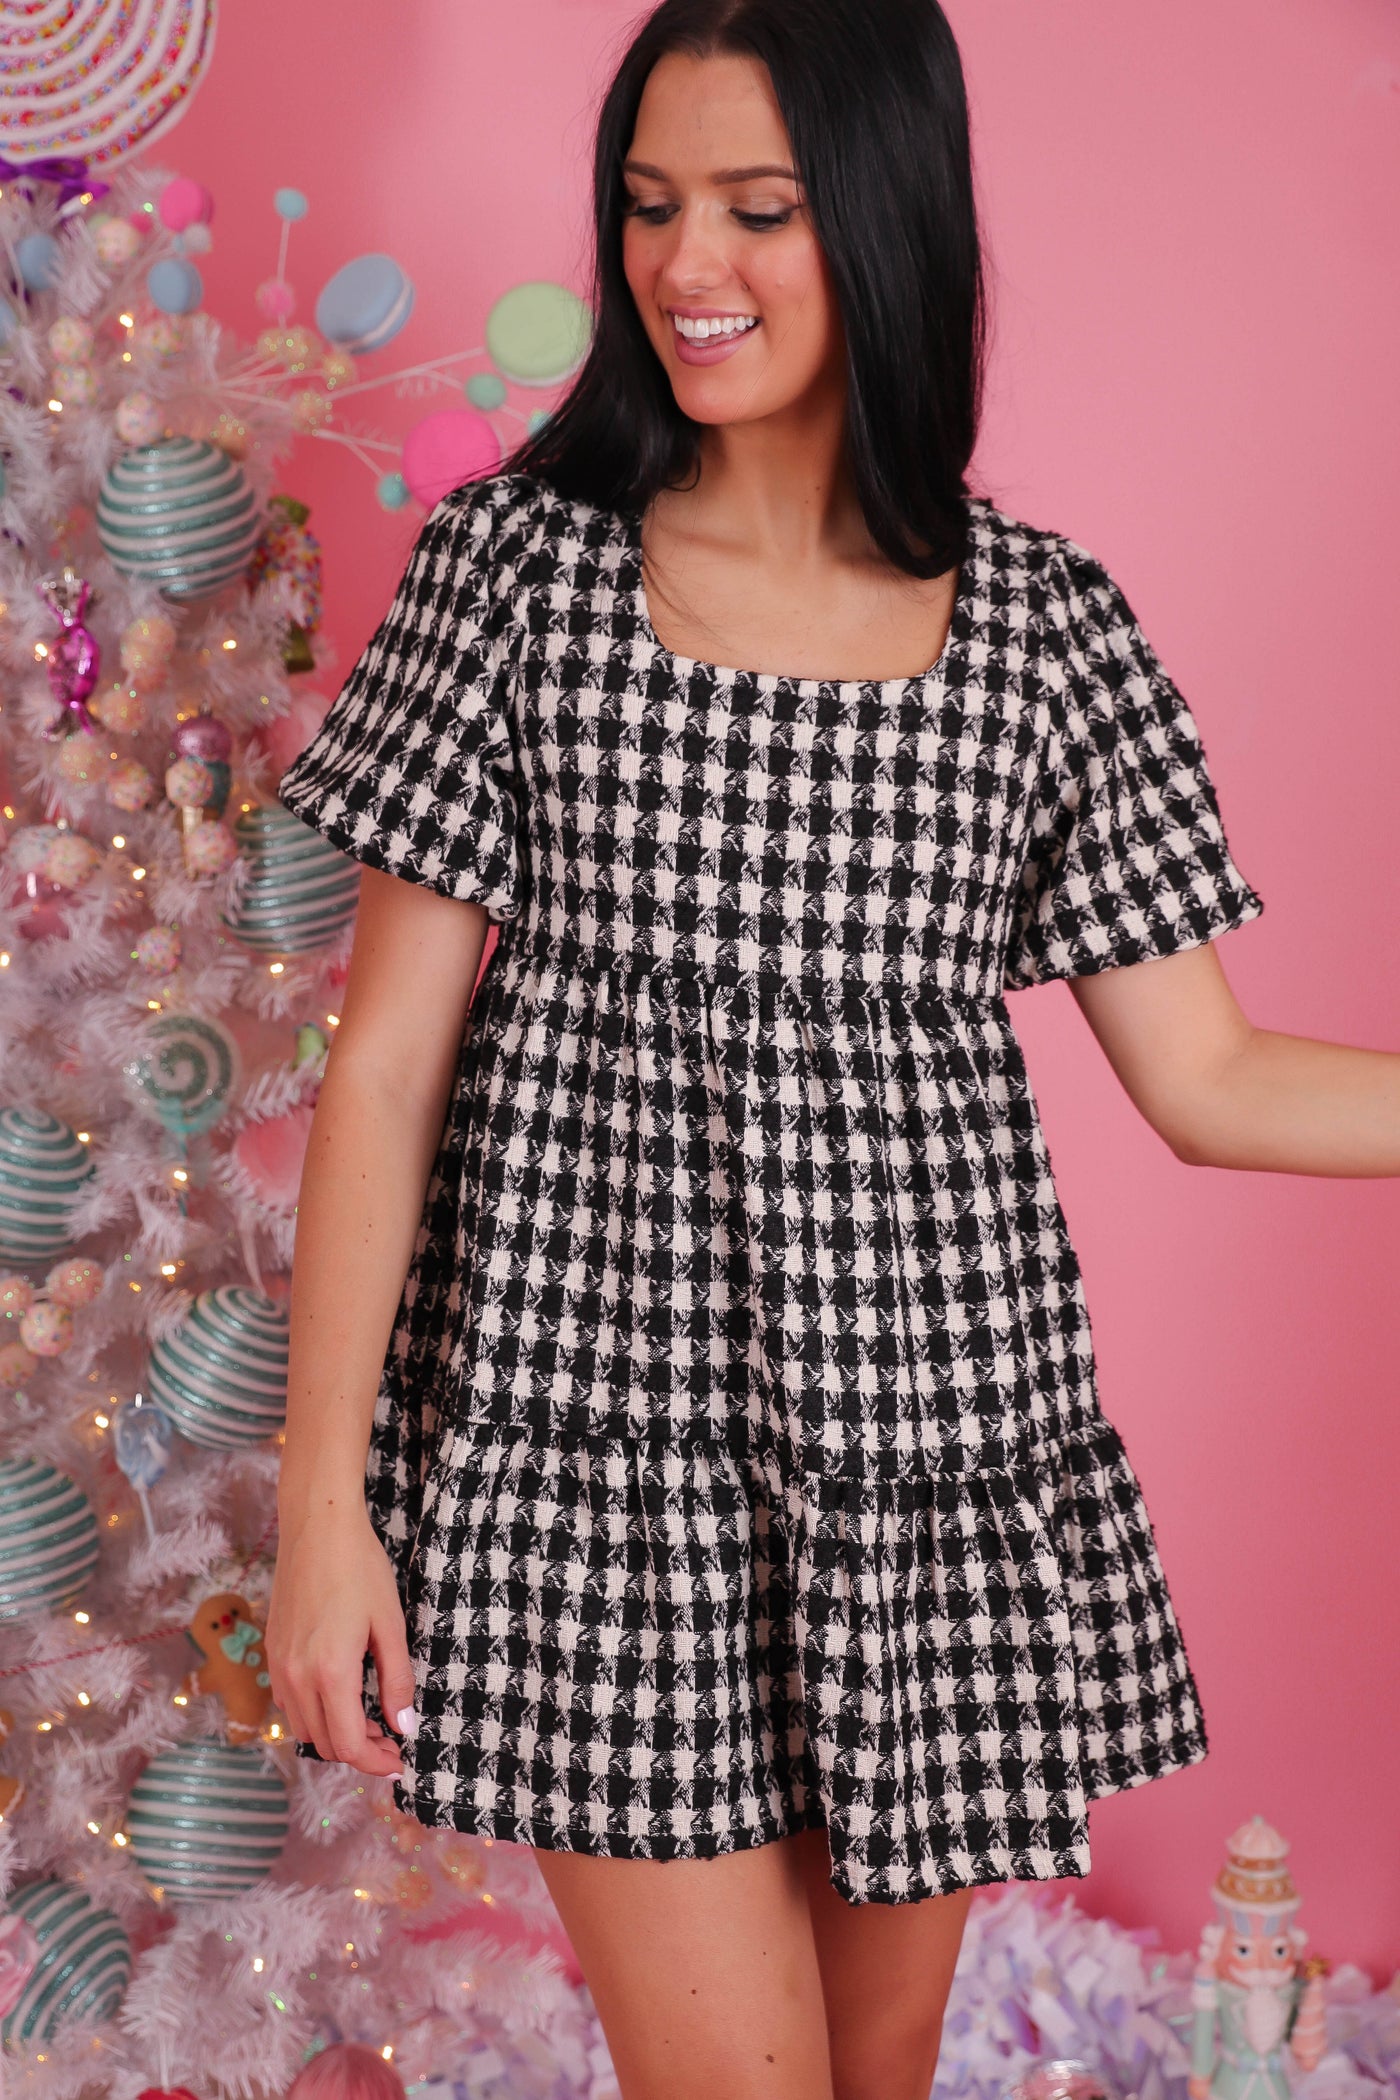 Women's Black and White Tweed Dress- Women's Houndstooth Dress- Entro Dresses